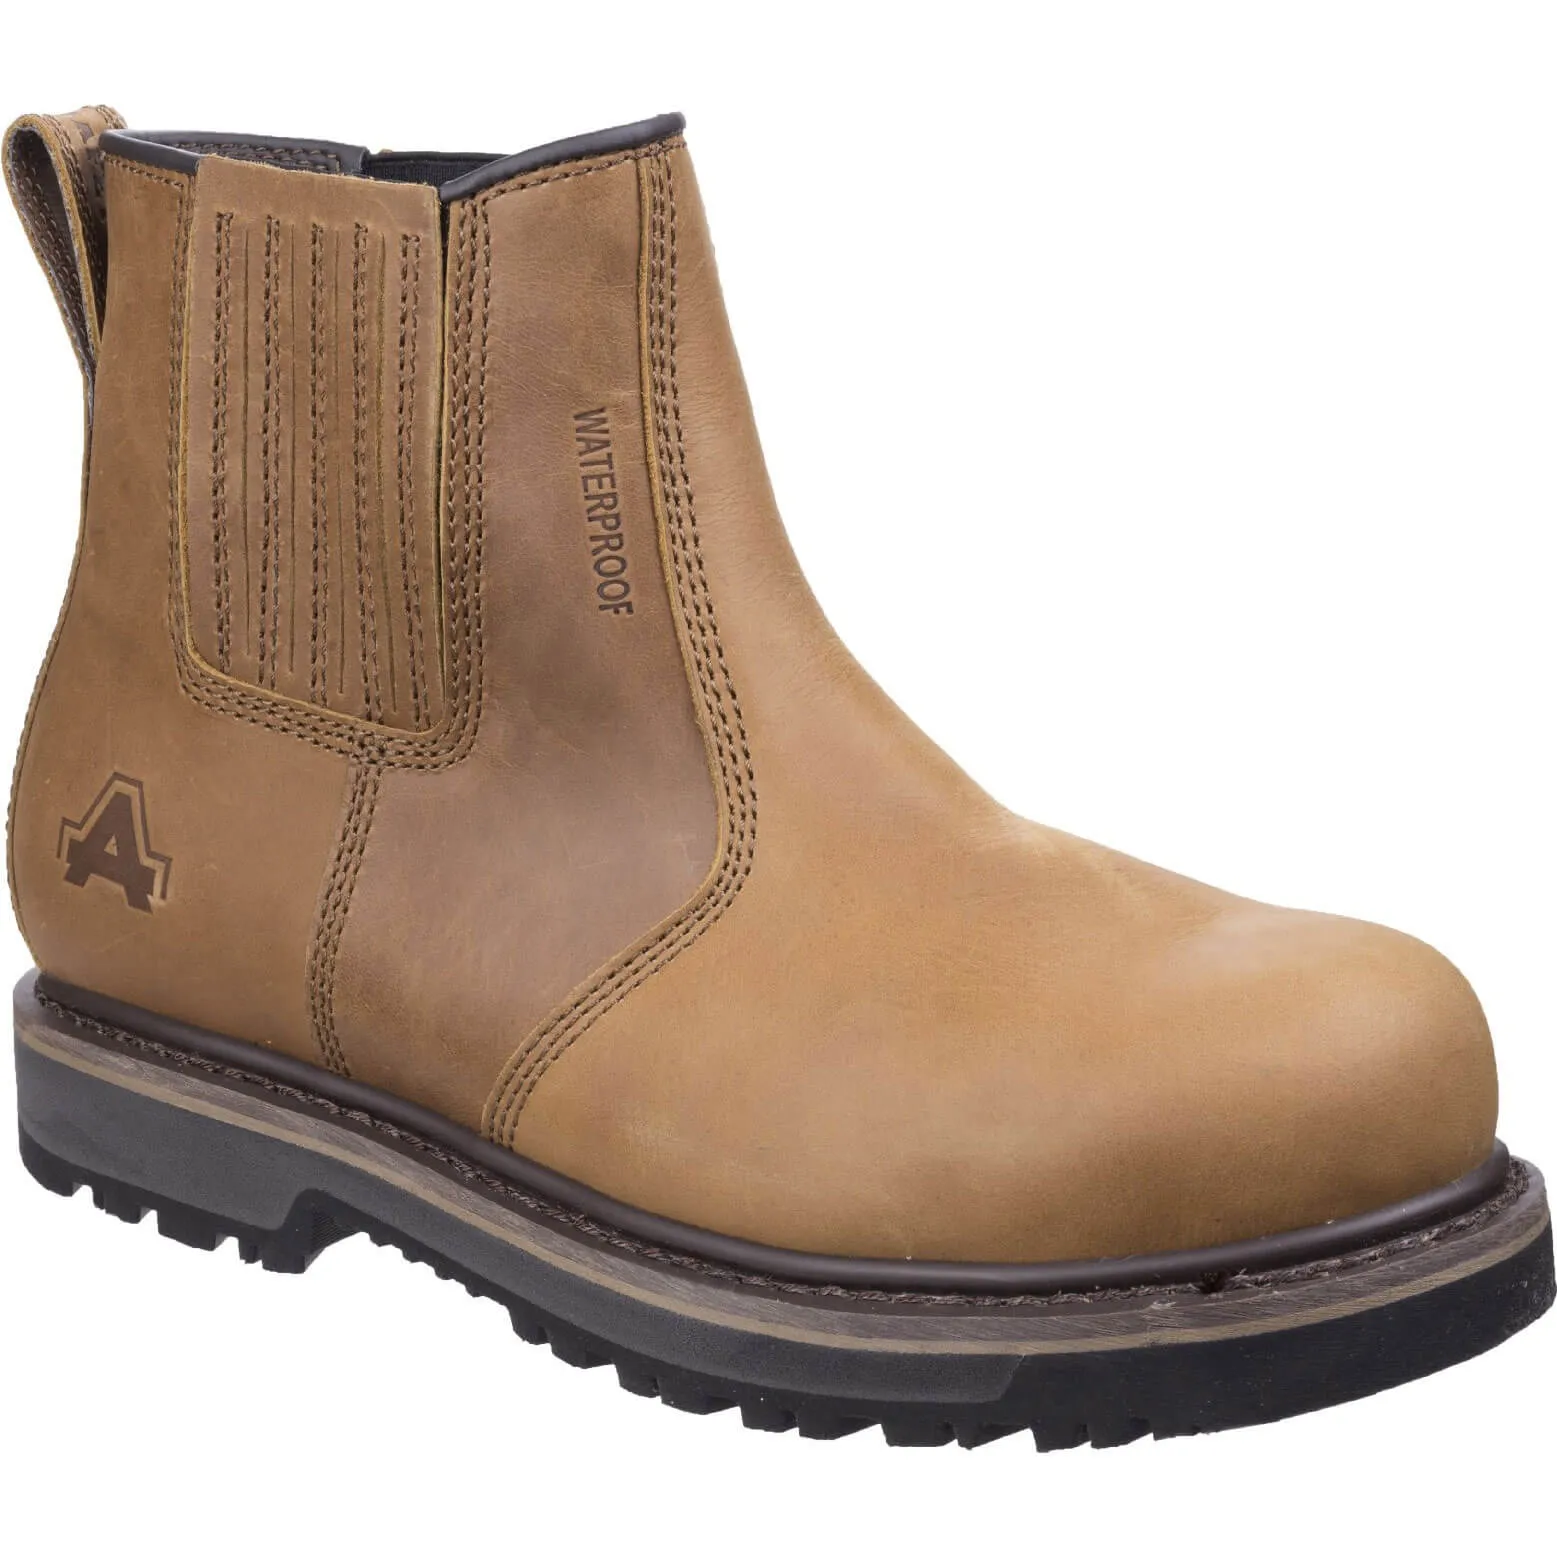 Amblers Mens Safety As232 Safety Boots - Tan, Size 6